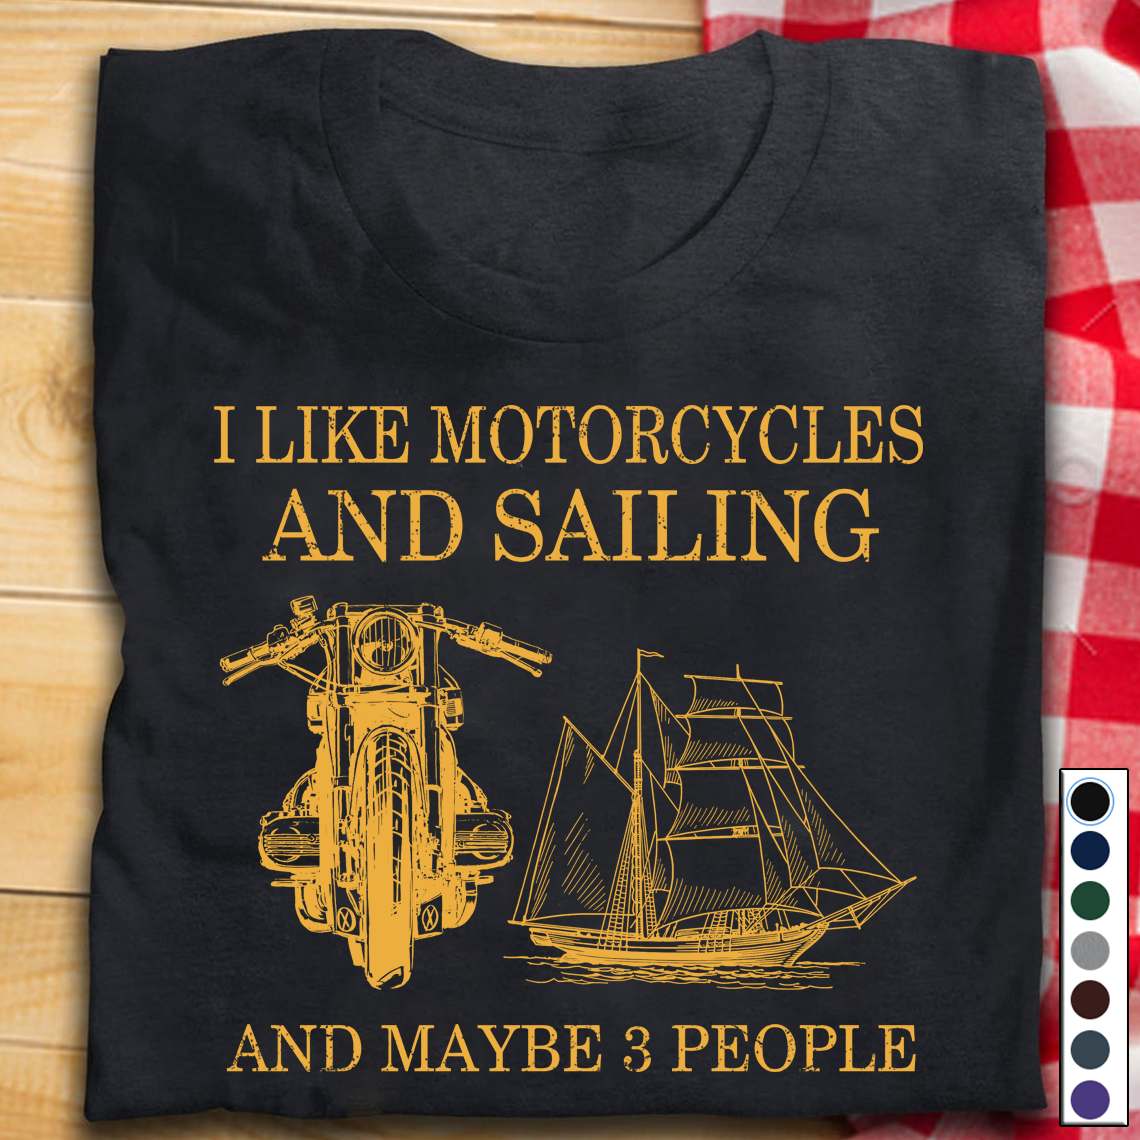 I like motorcycles and sailing and maybe 3 people - Love sailing boat